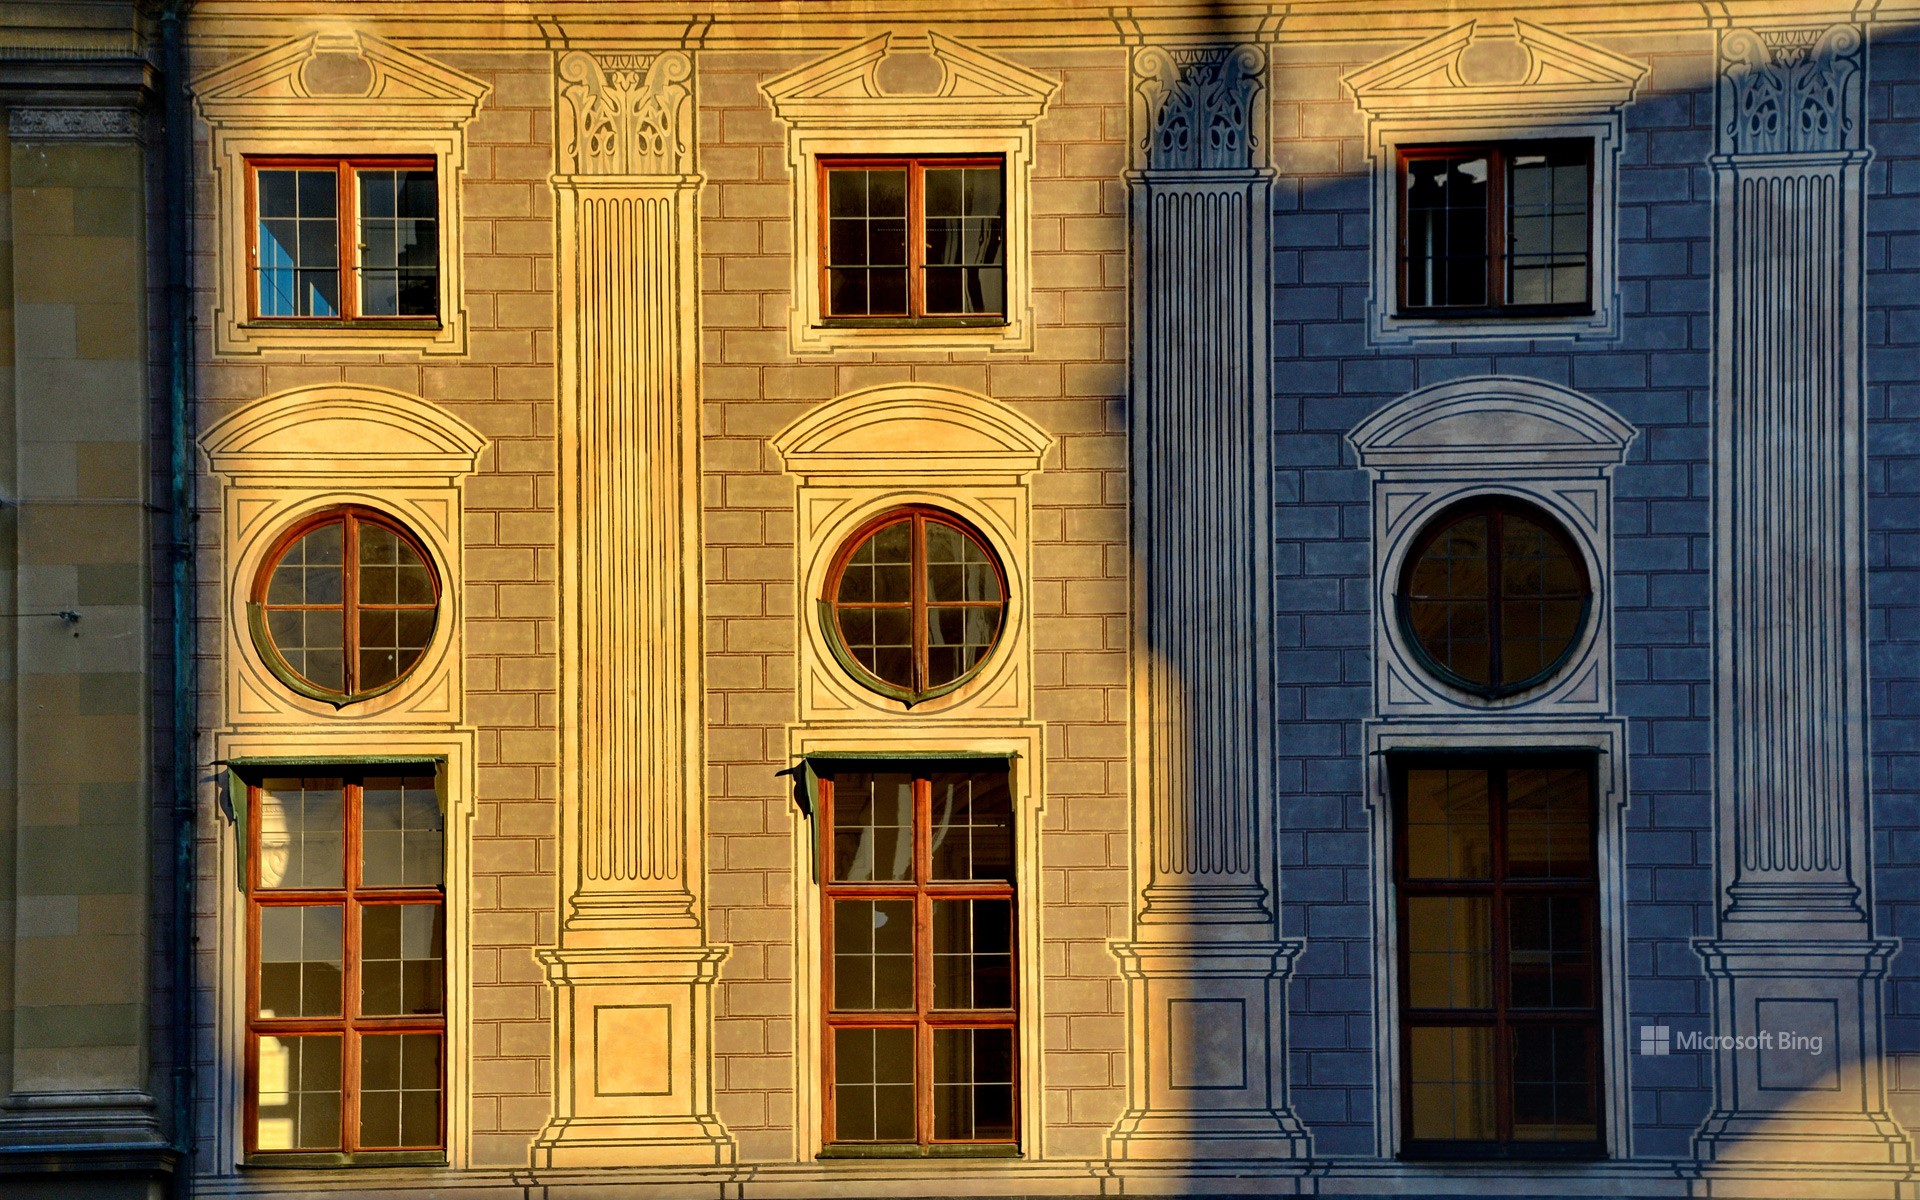 Facade detail of the Residenz in Munich, Bavaria, Germany